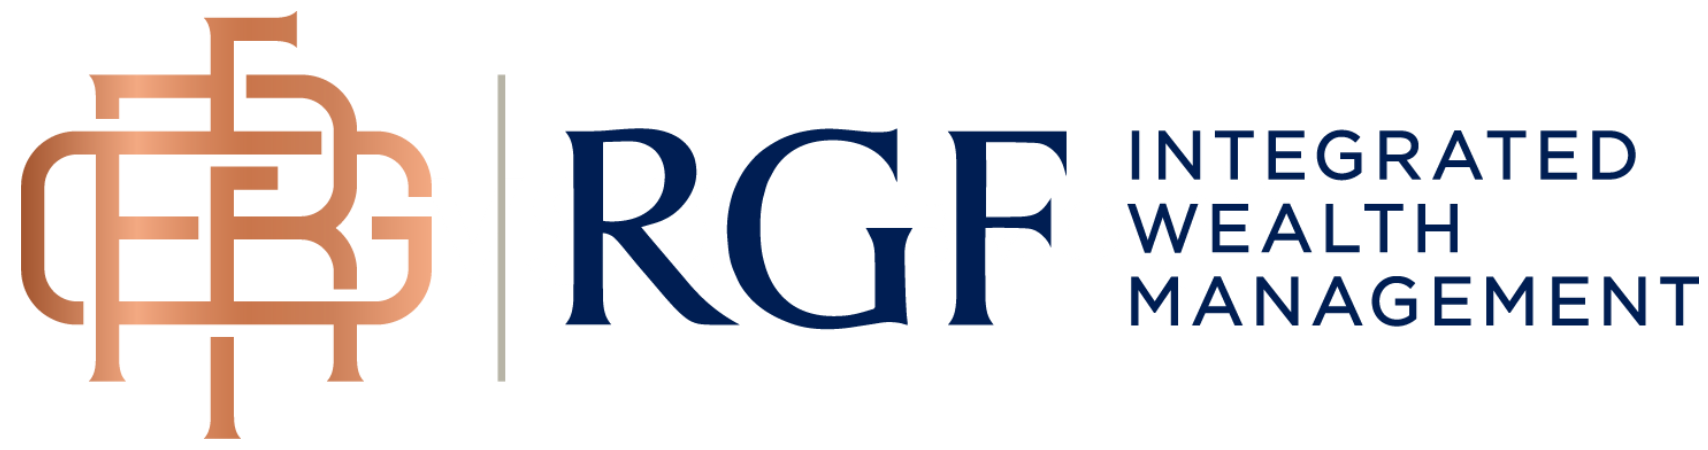 RGF Integrated Wealth